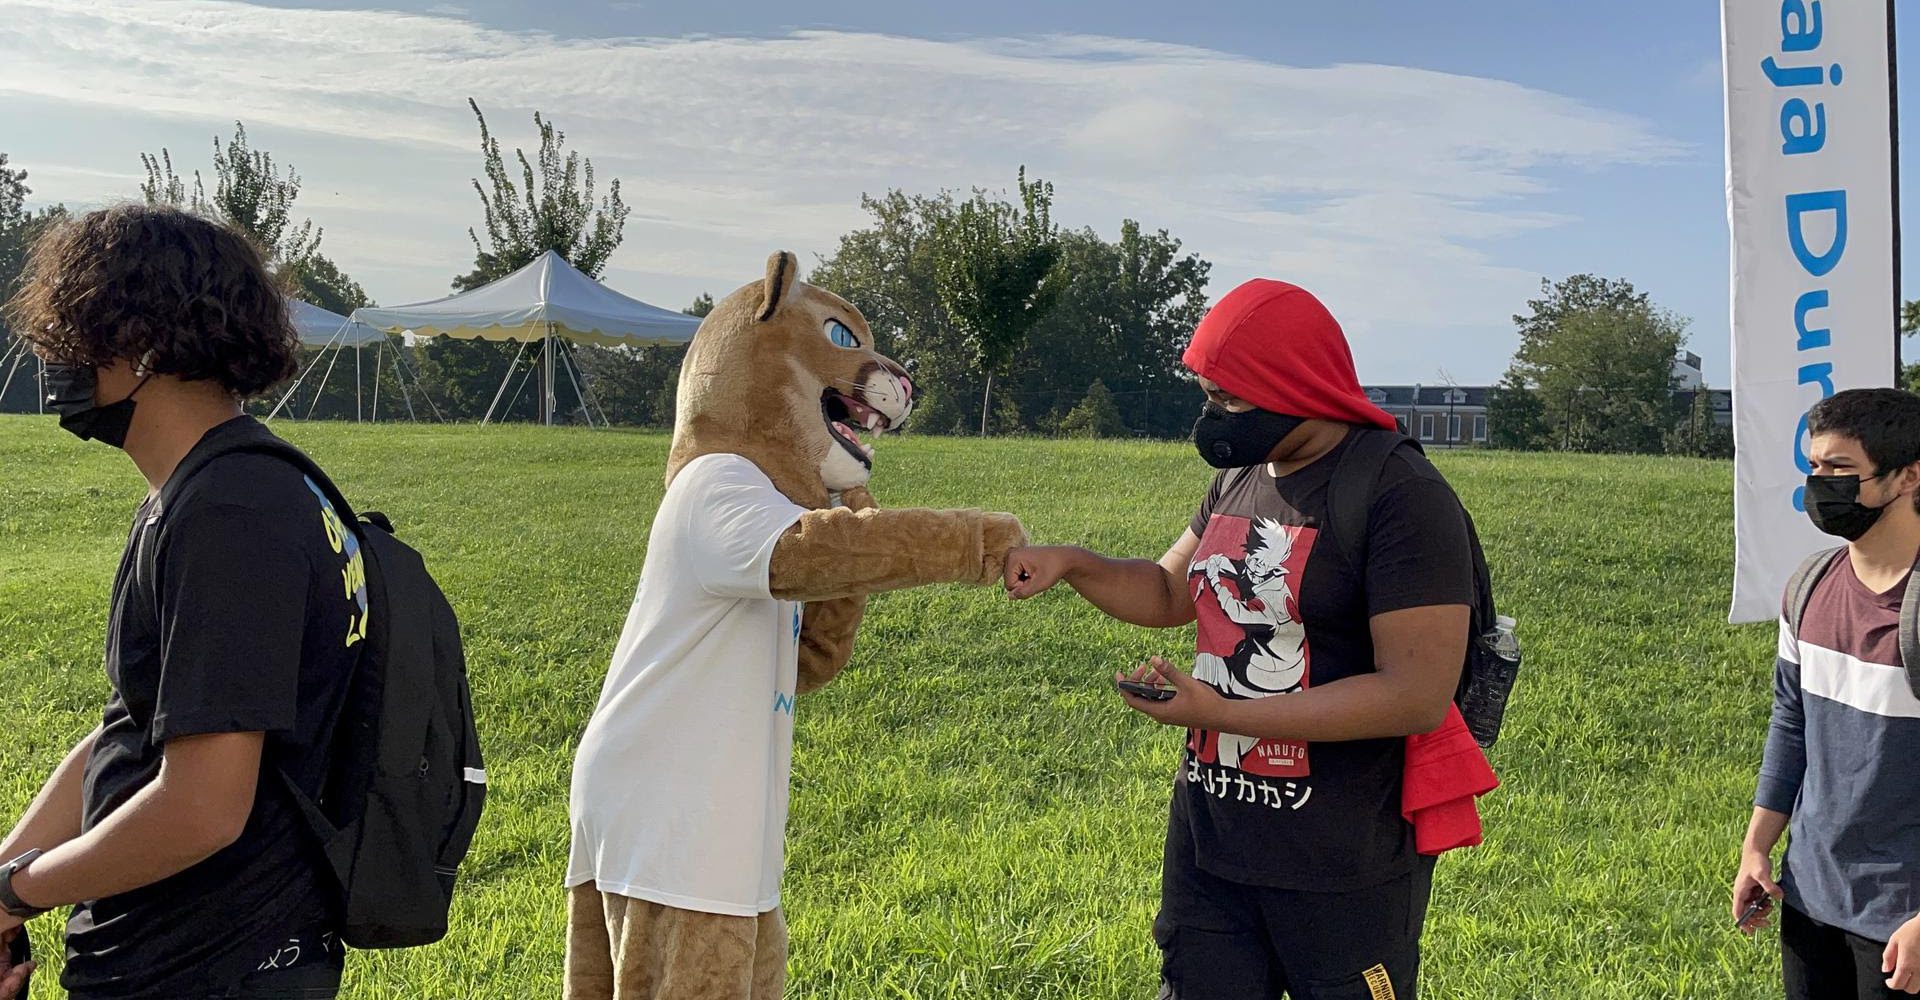 Image of a mountain lion mascot bumping fists with a high school student on the first day of school.